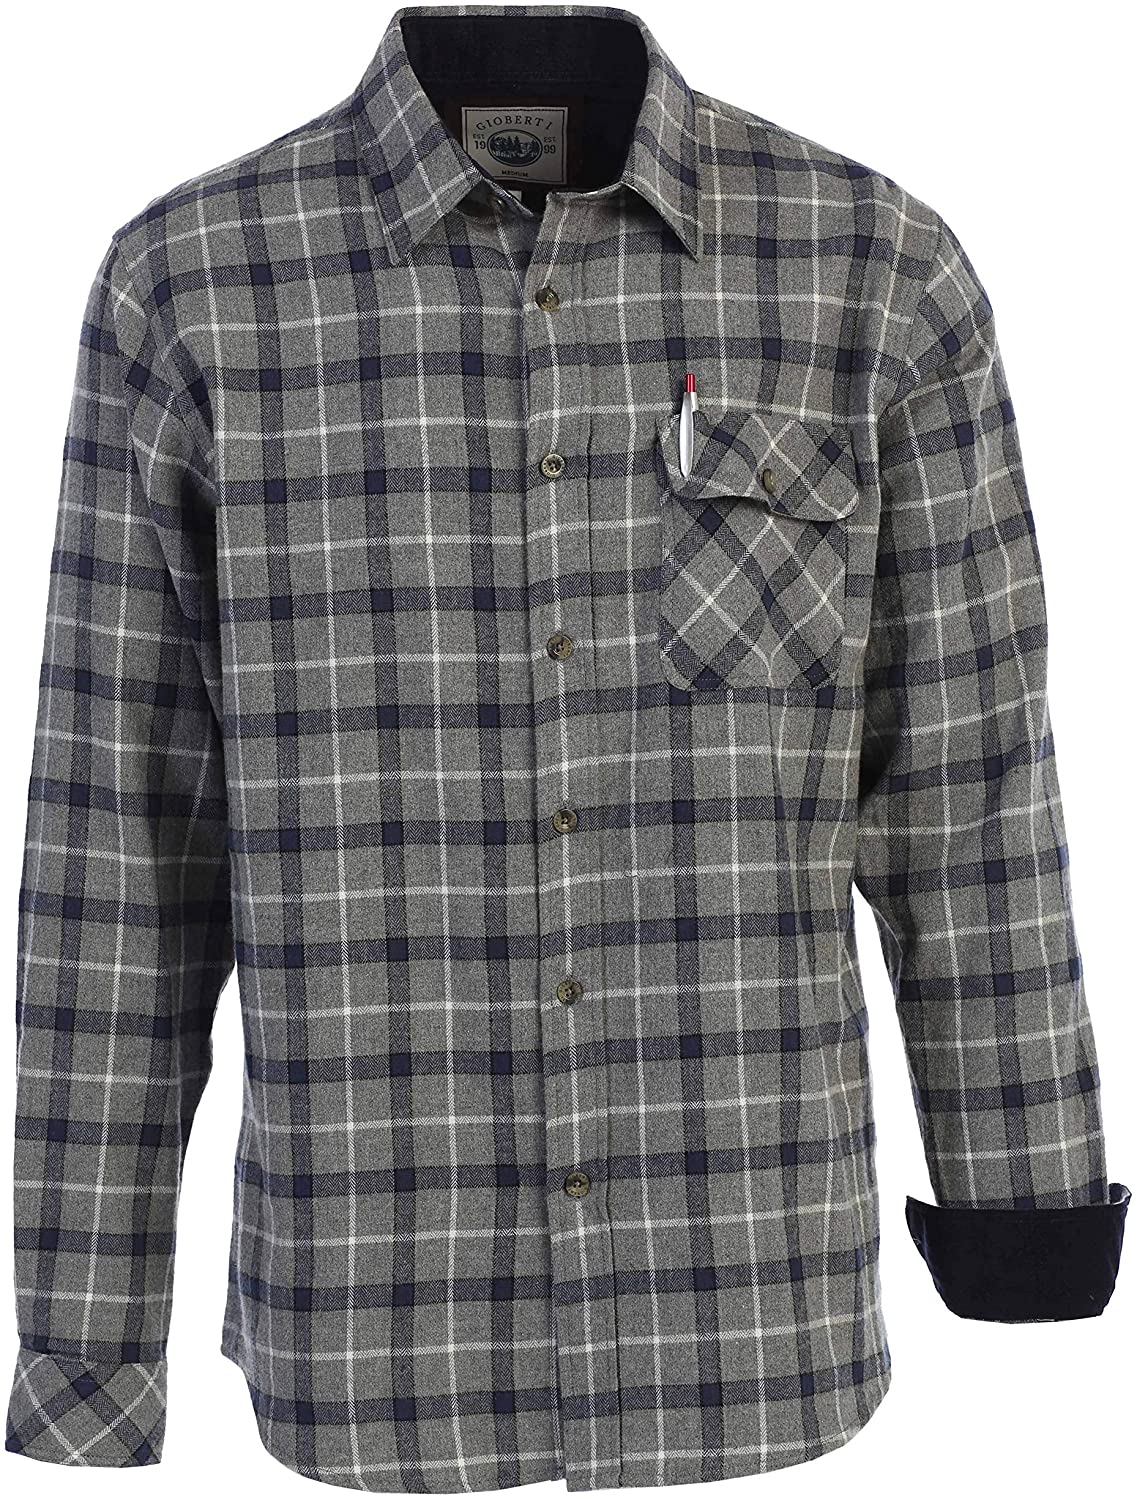 Gioberti Men's 100% Cotton Brushed Flannel Plaid Checkered Shirt with Corduroy C